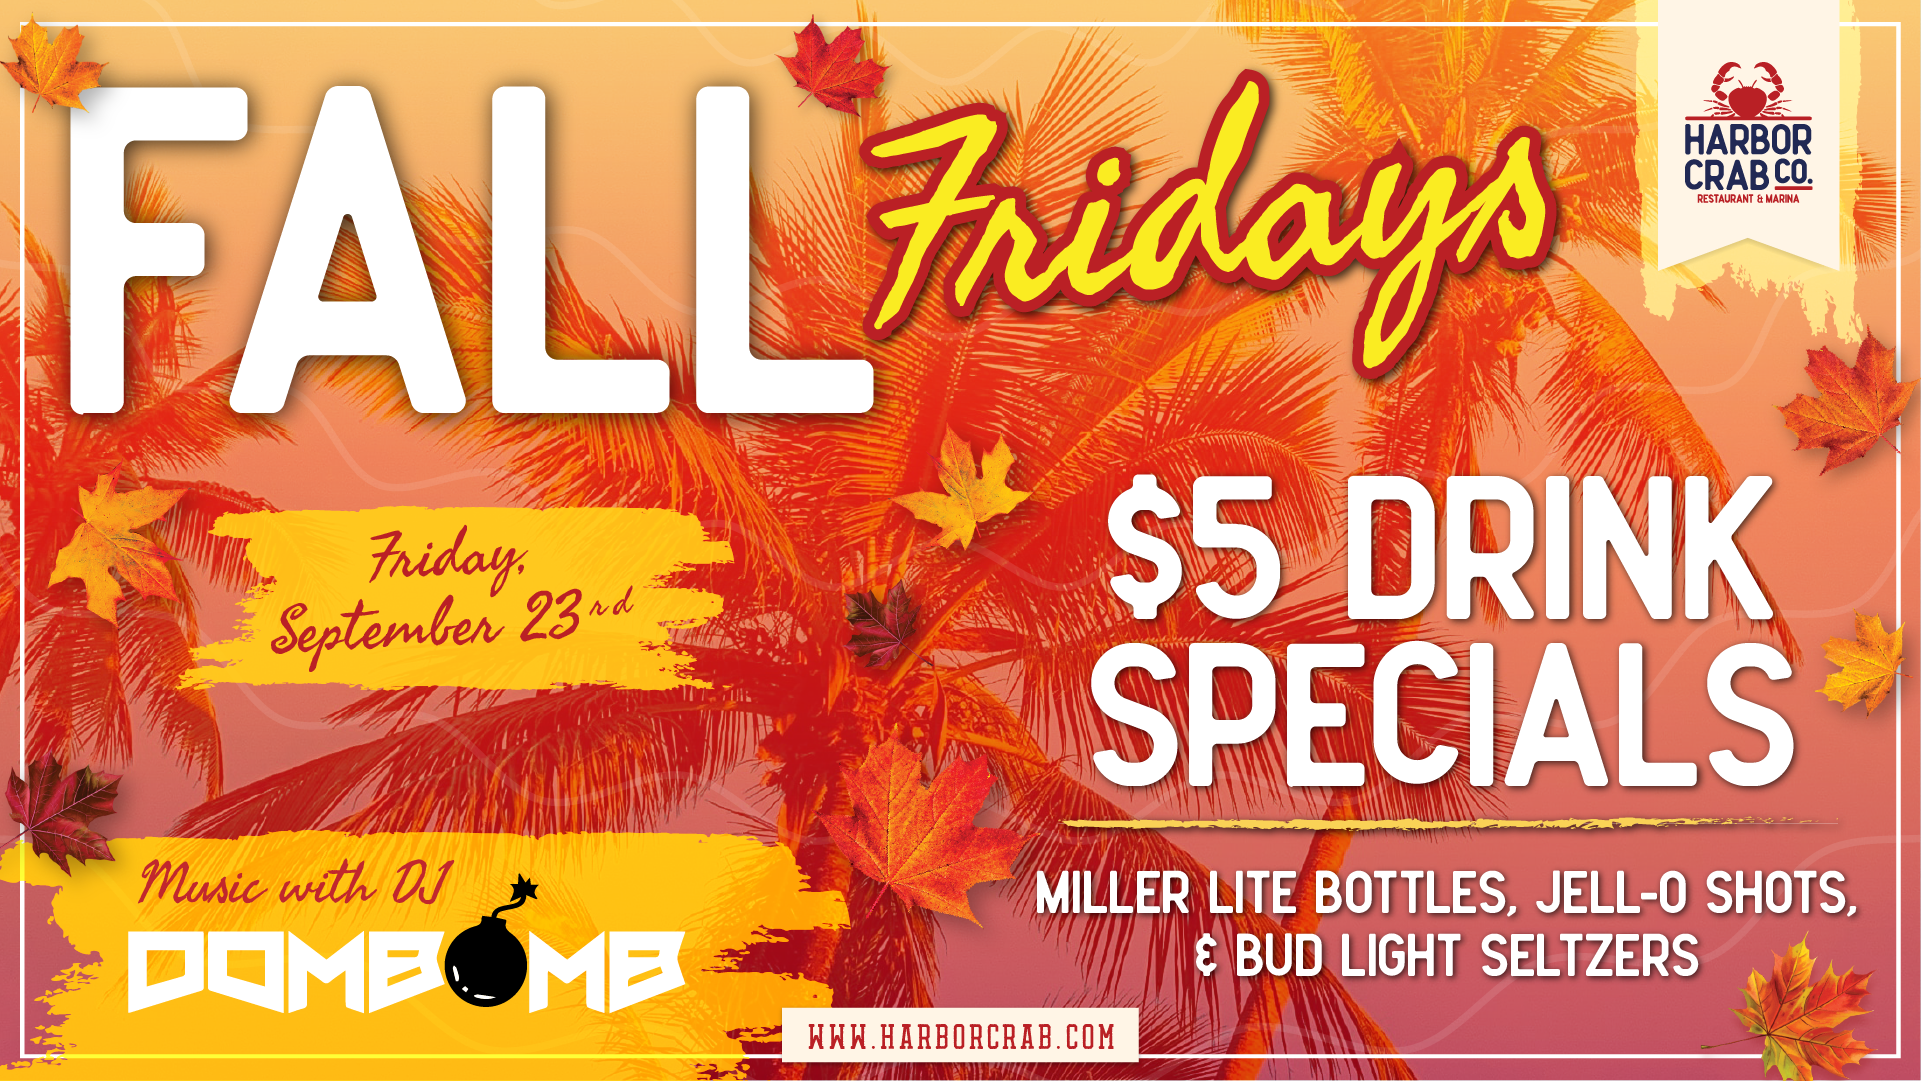 Fall Friday with DJ Dombomb on September 23rd